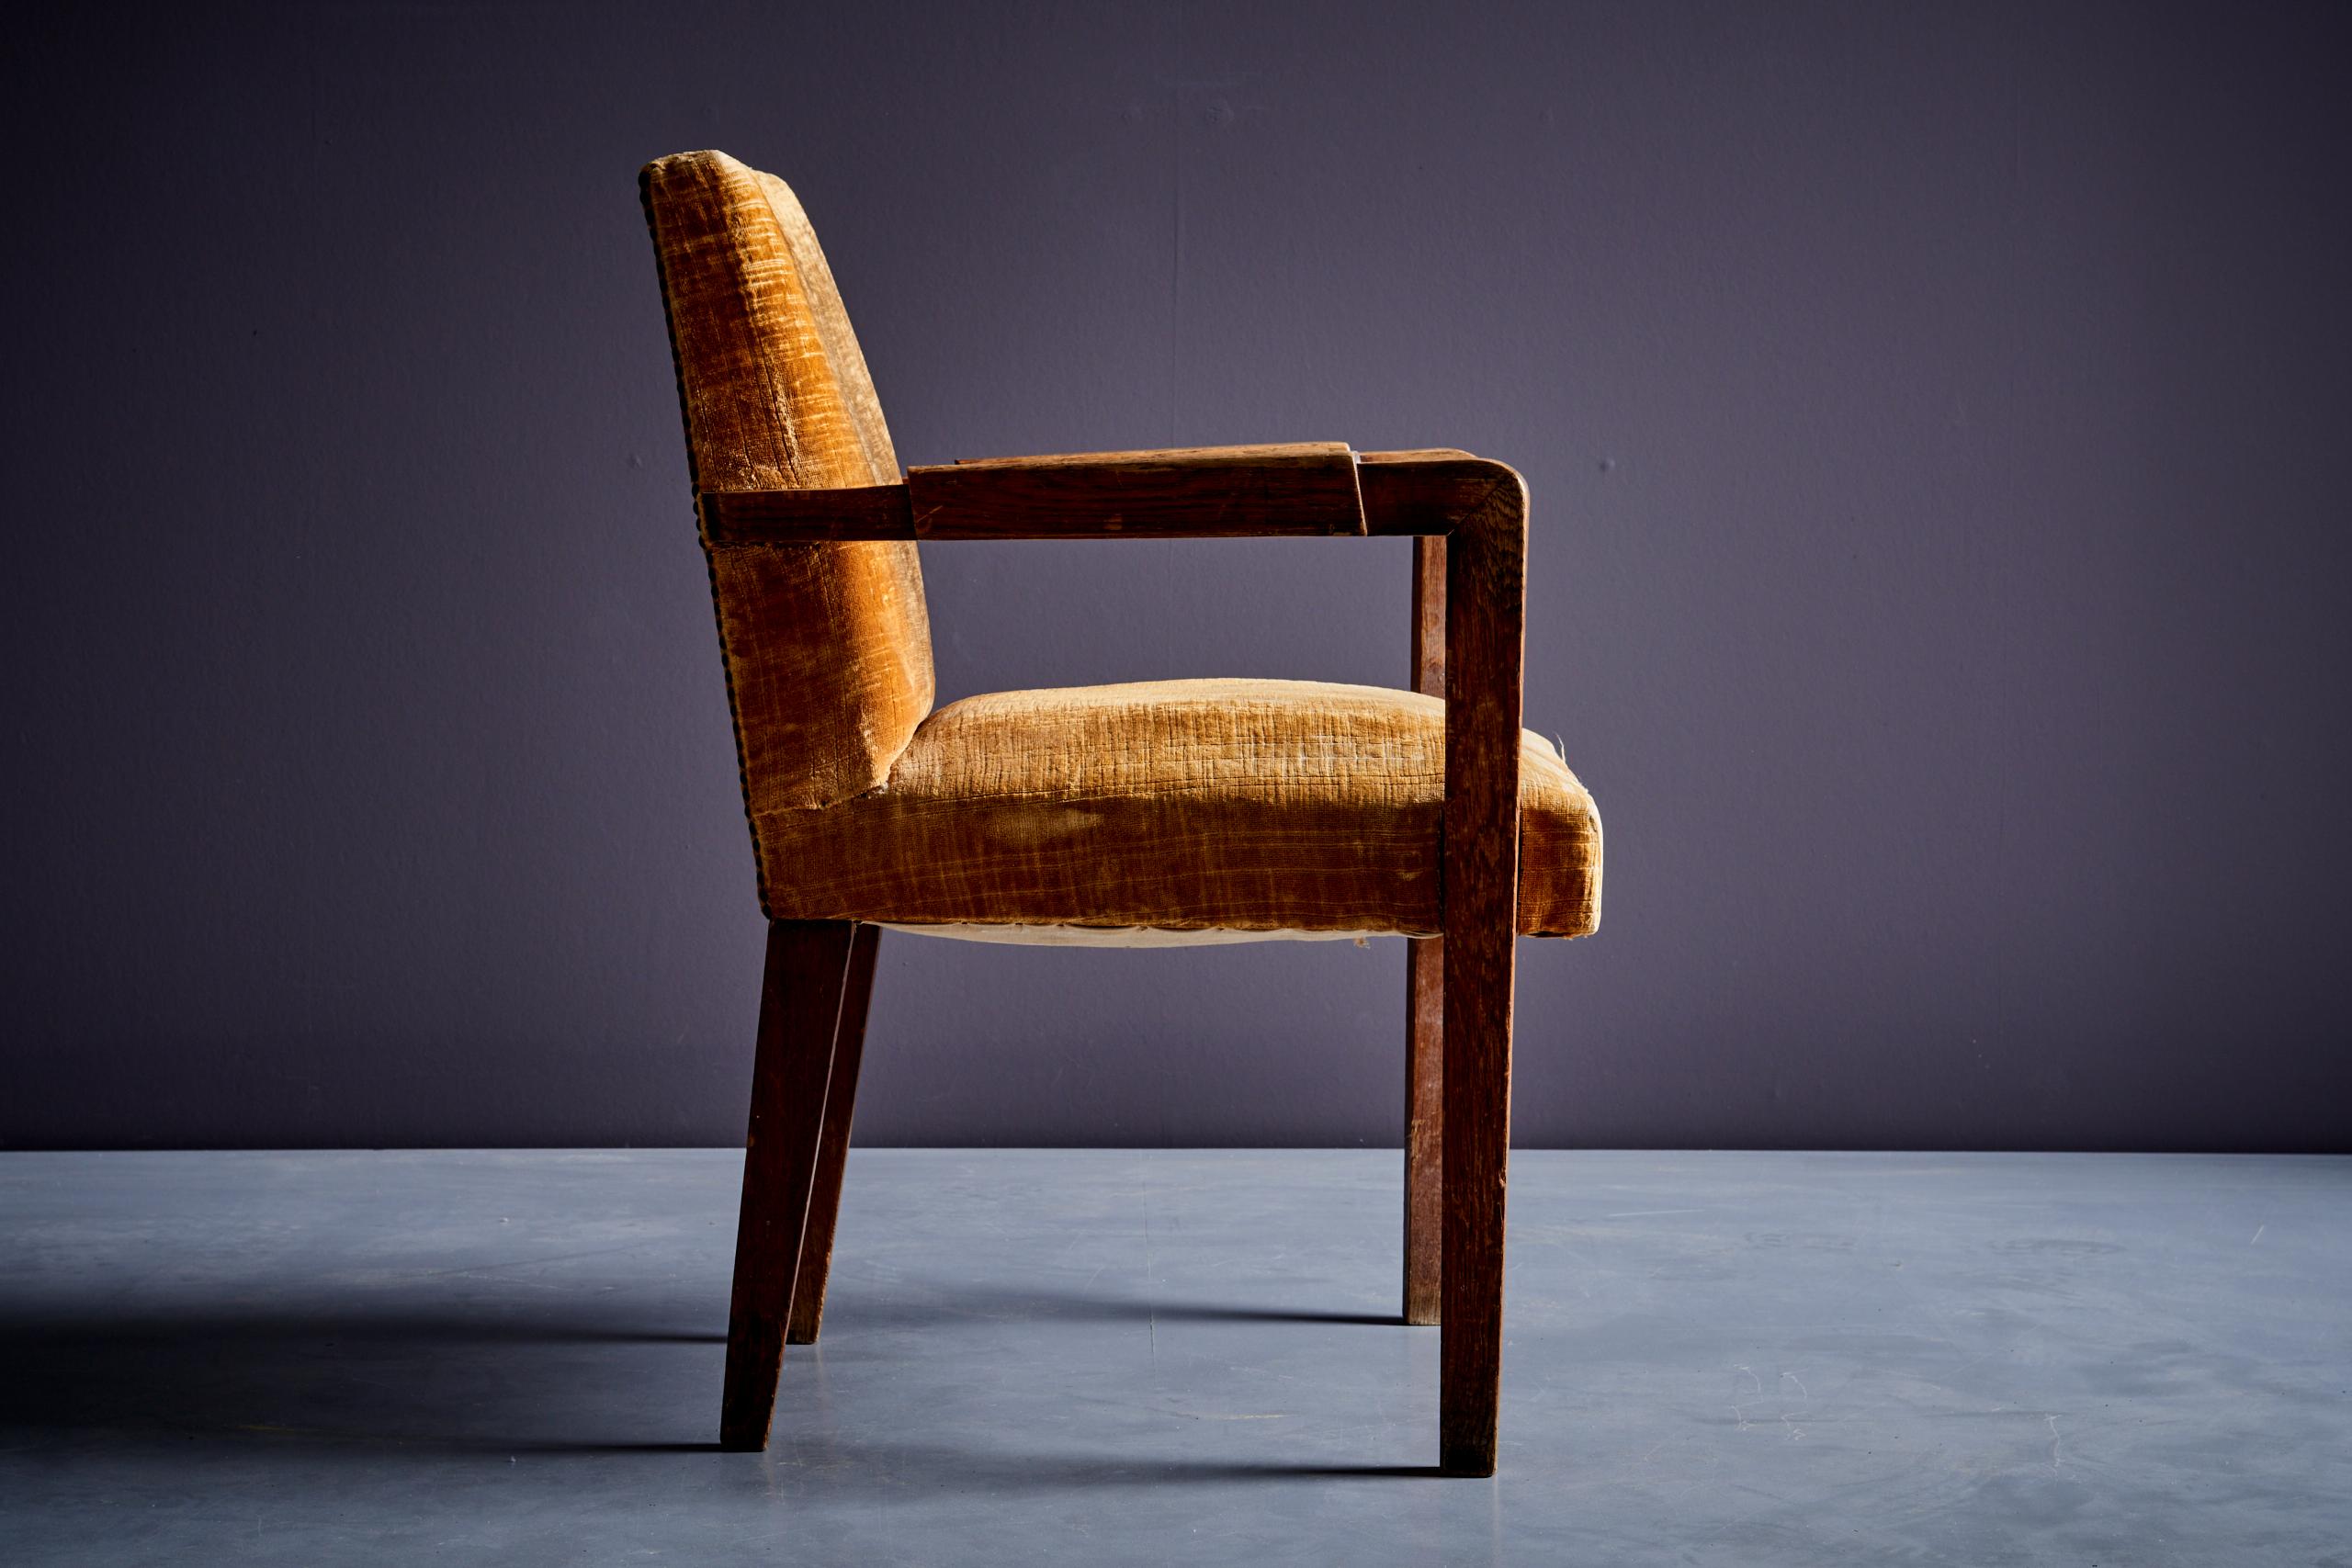 Mid-20th Century Art Deco Armchair in Oak and mustard colored Upholstery, France - 1940s For Sale